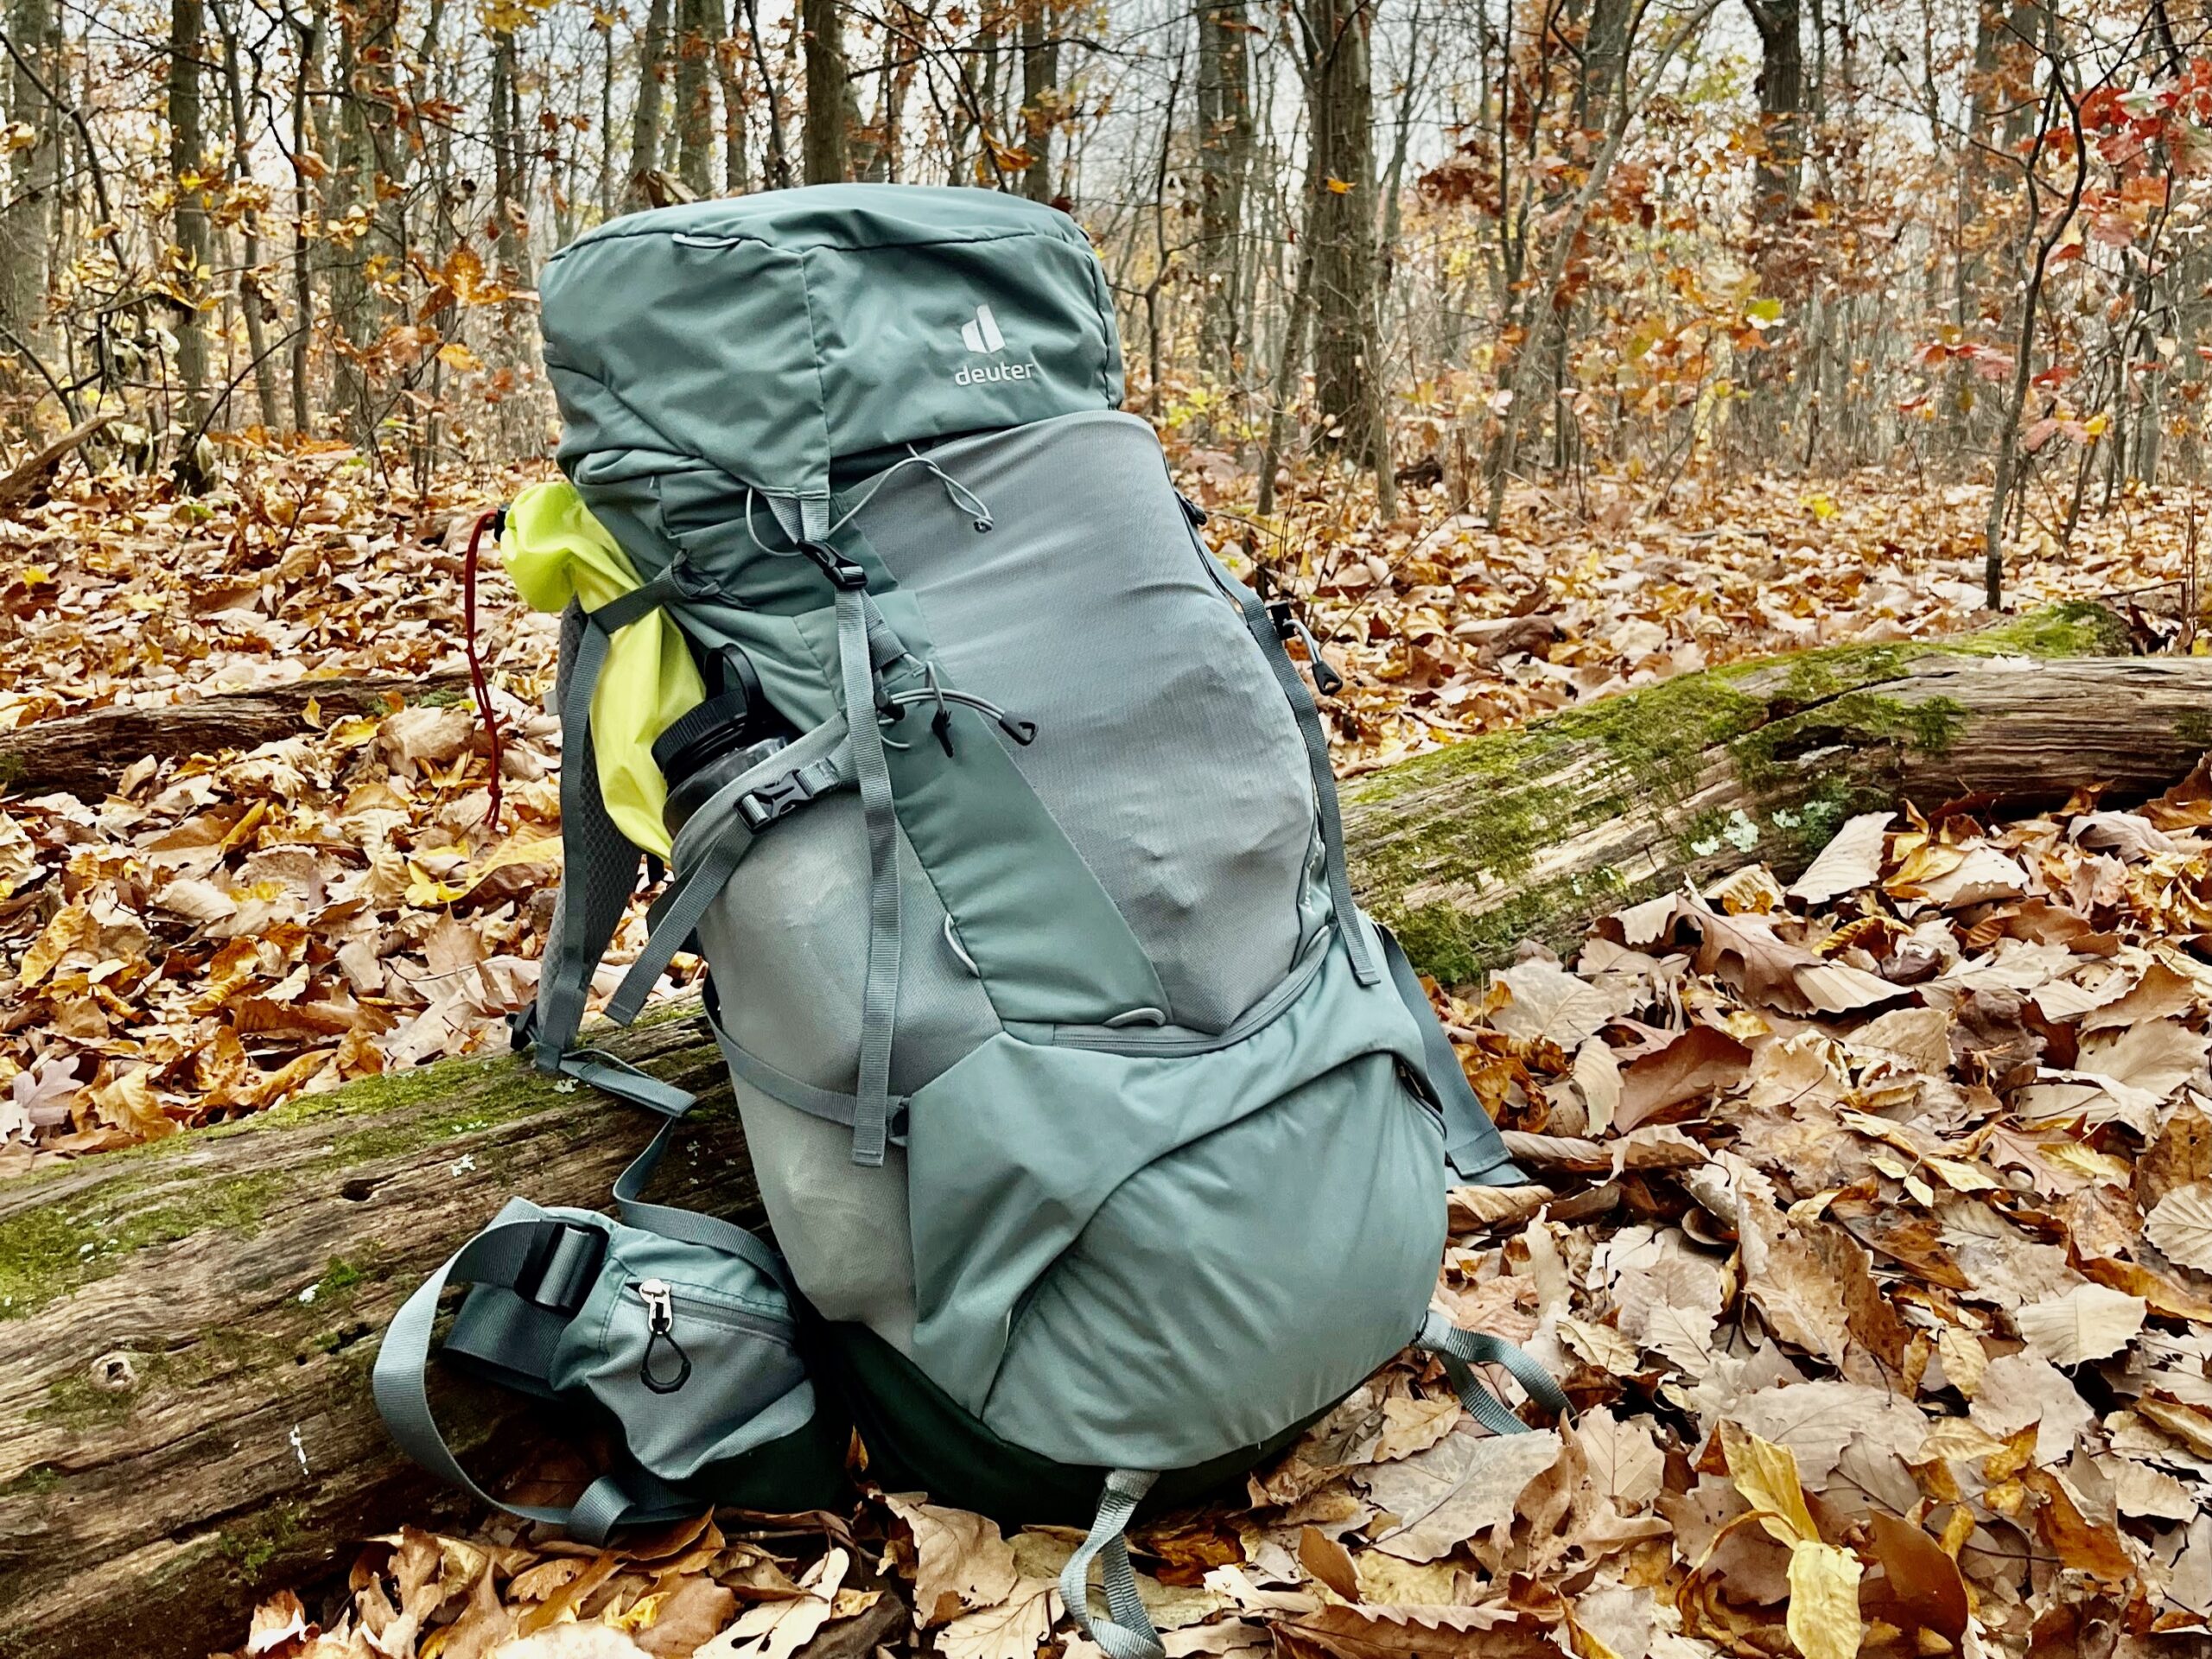 The Deuter Air Contact is the best backpacking backpack for men.